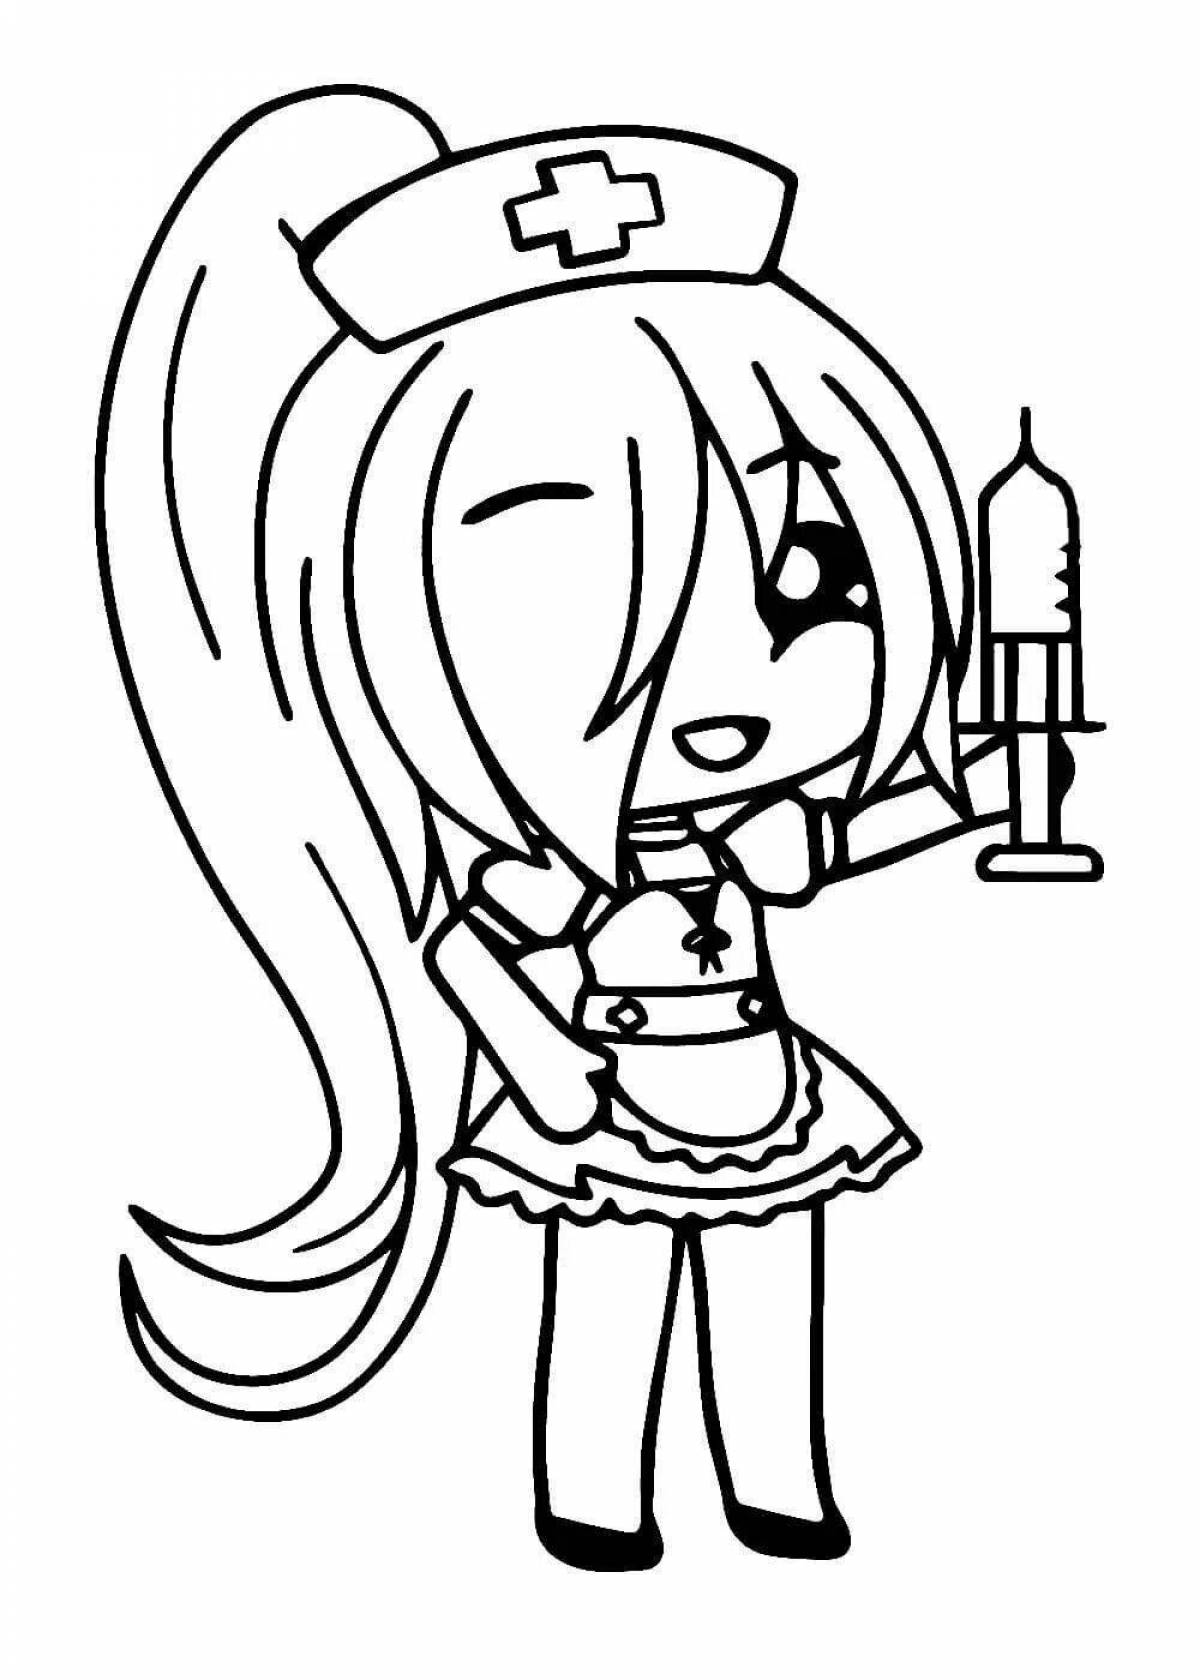 Tempting gacha life coloring page